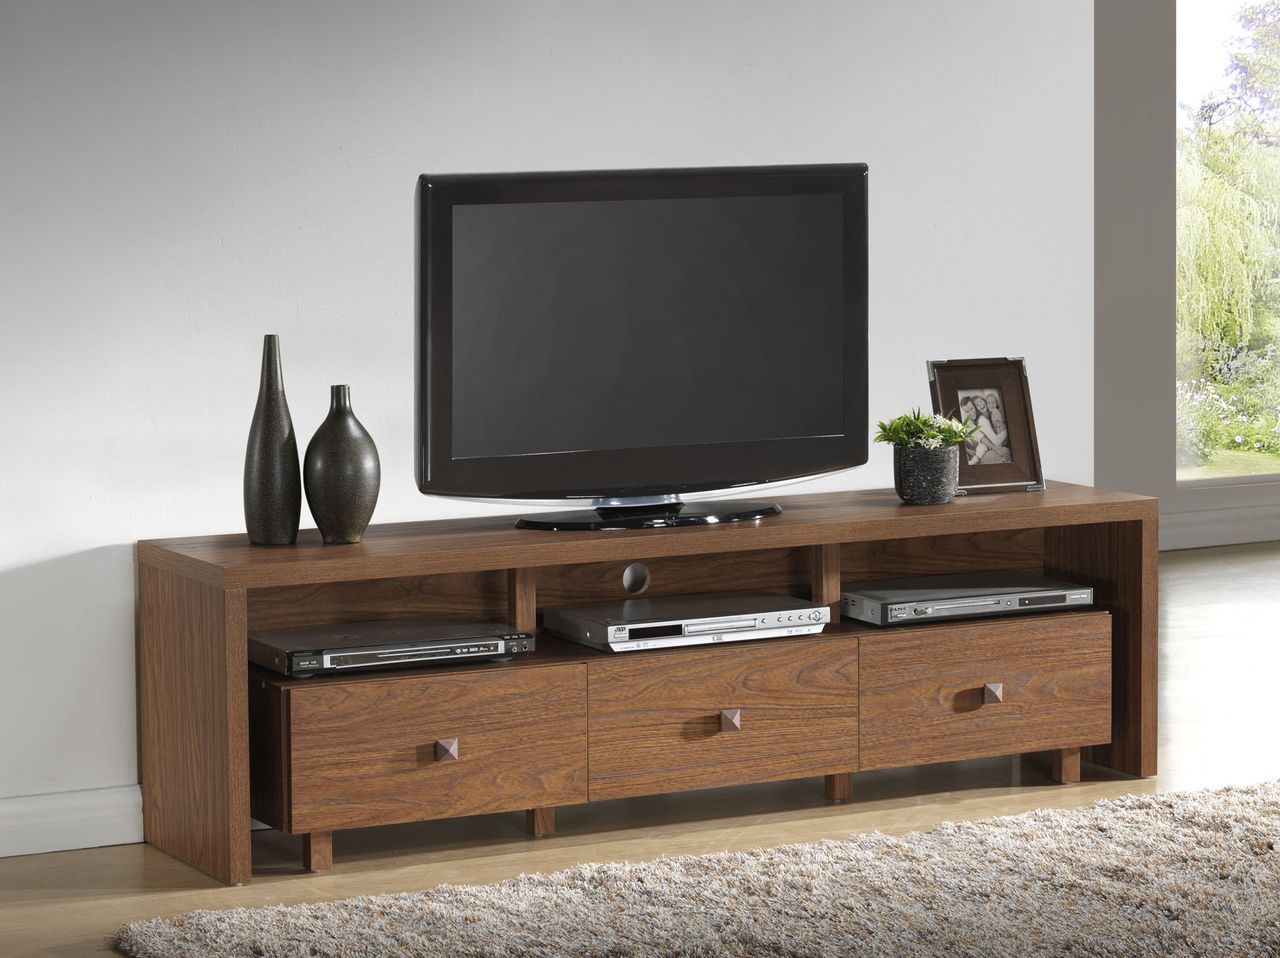 Techni Mobili Palma Tv Cabinet For Tvs Up To 75", 3 Drawer In Tv Stands And Cabinets (View 15 of 15)